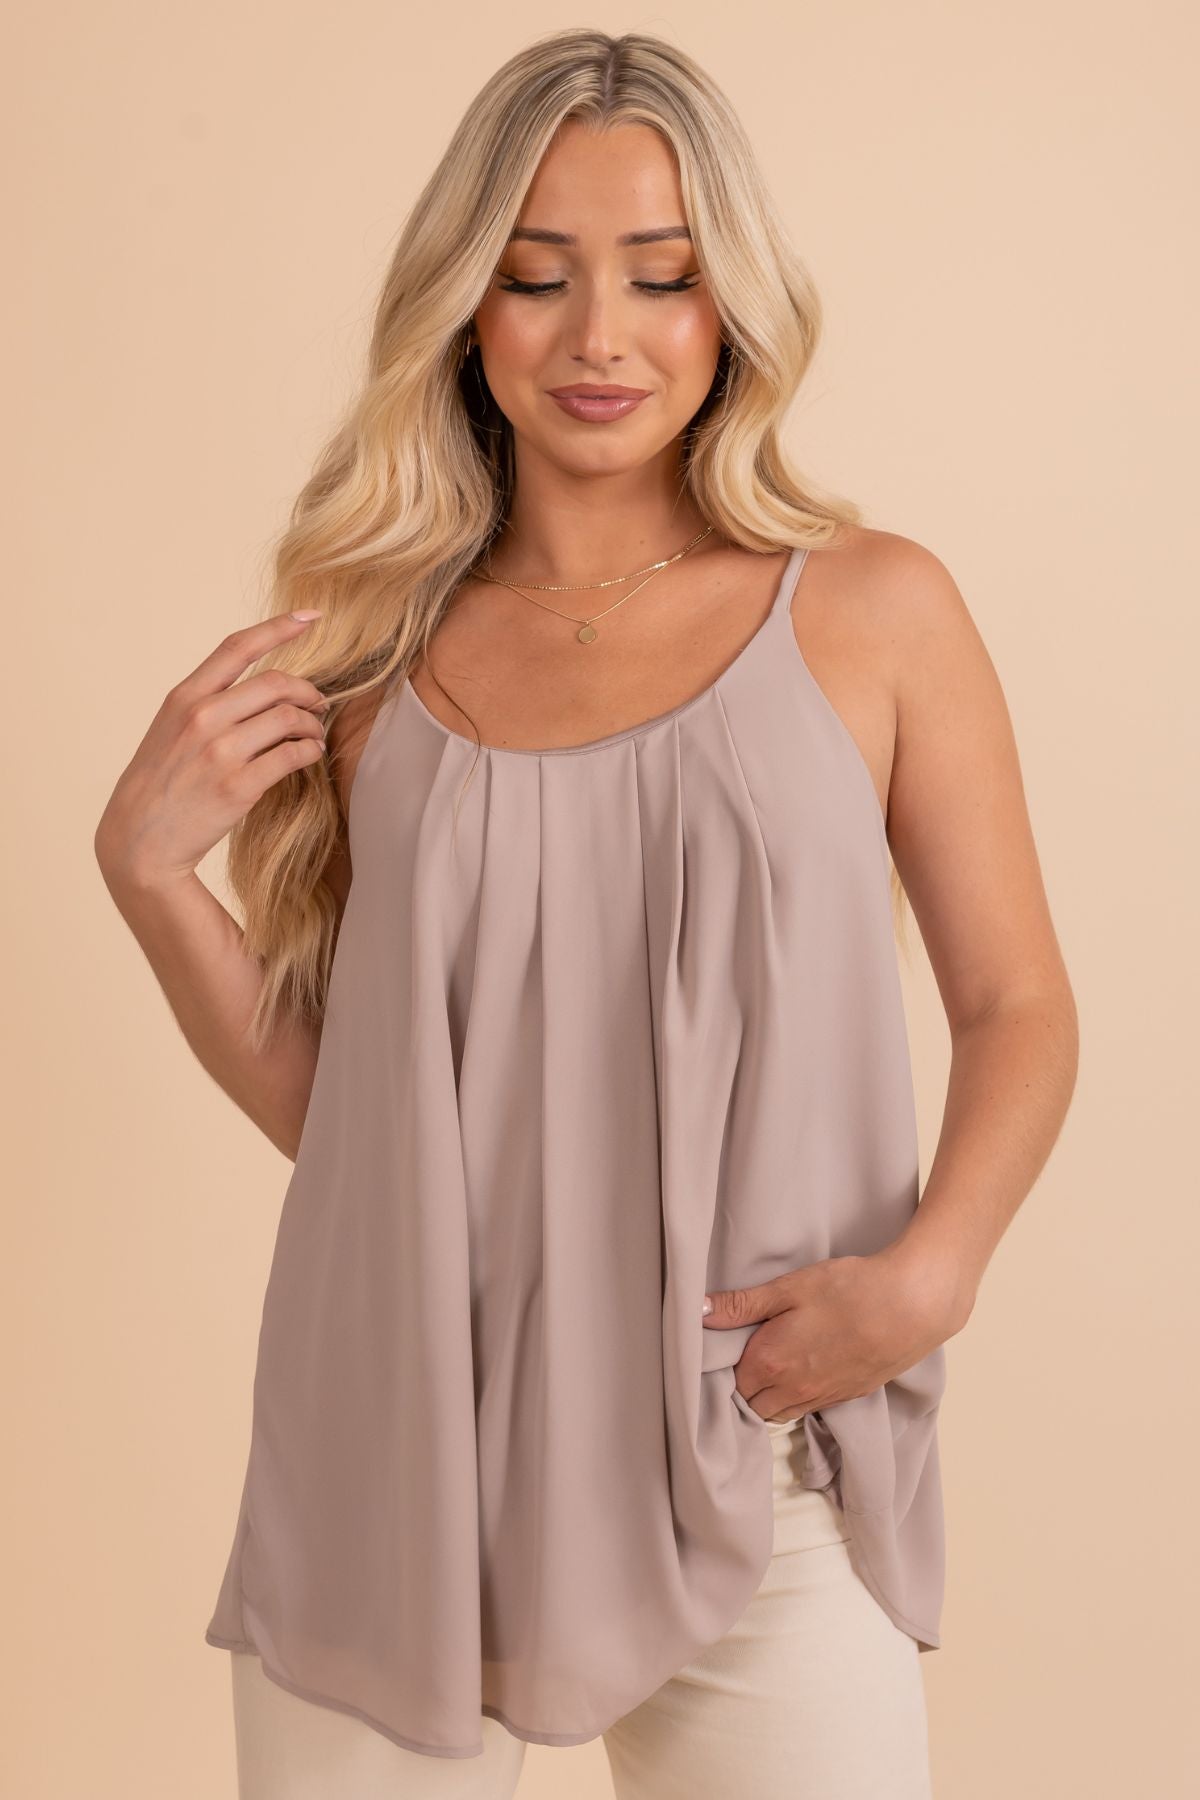 Pursue Passion Pleated Tank Top